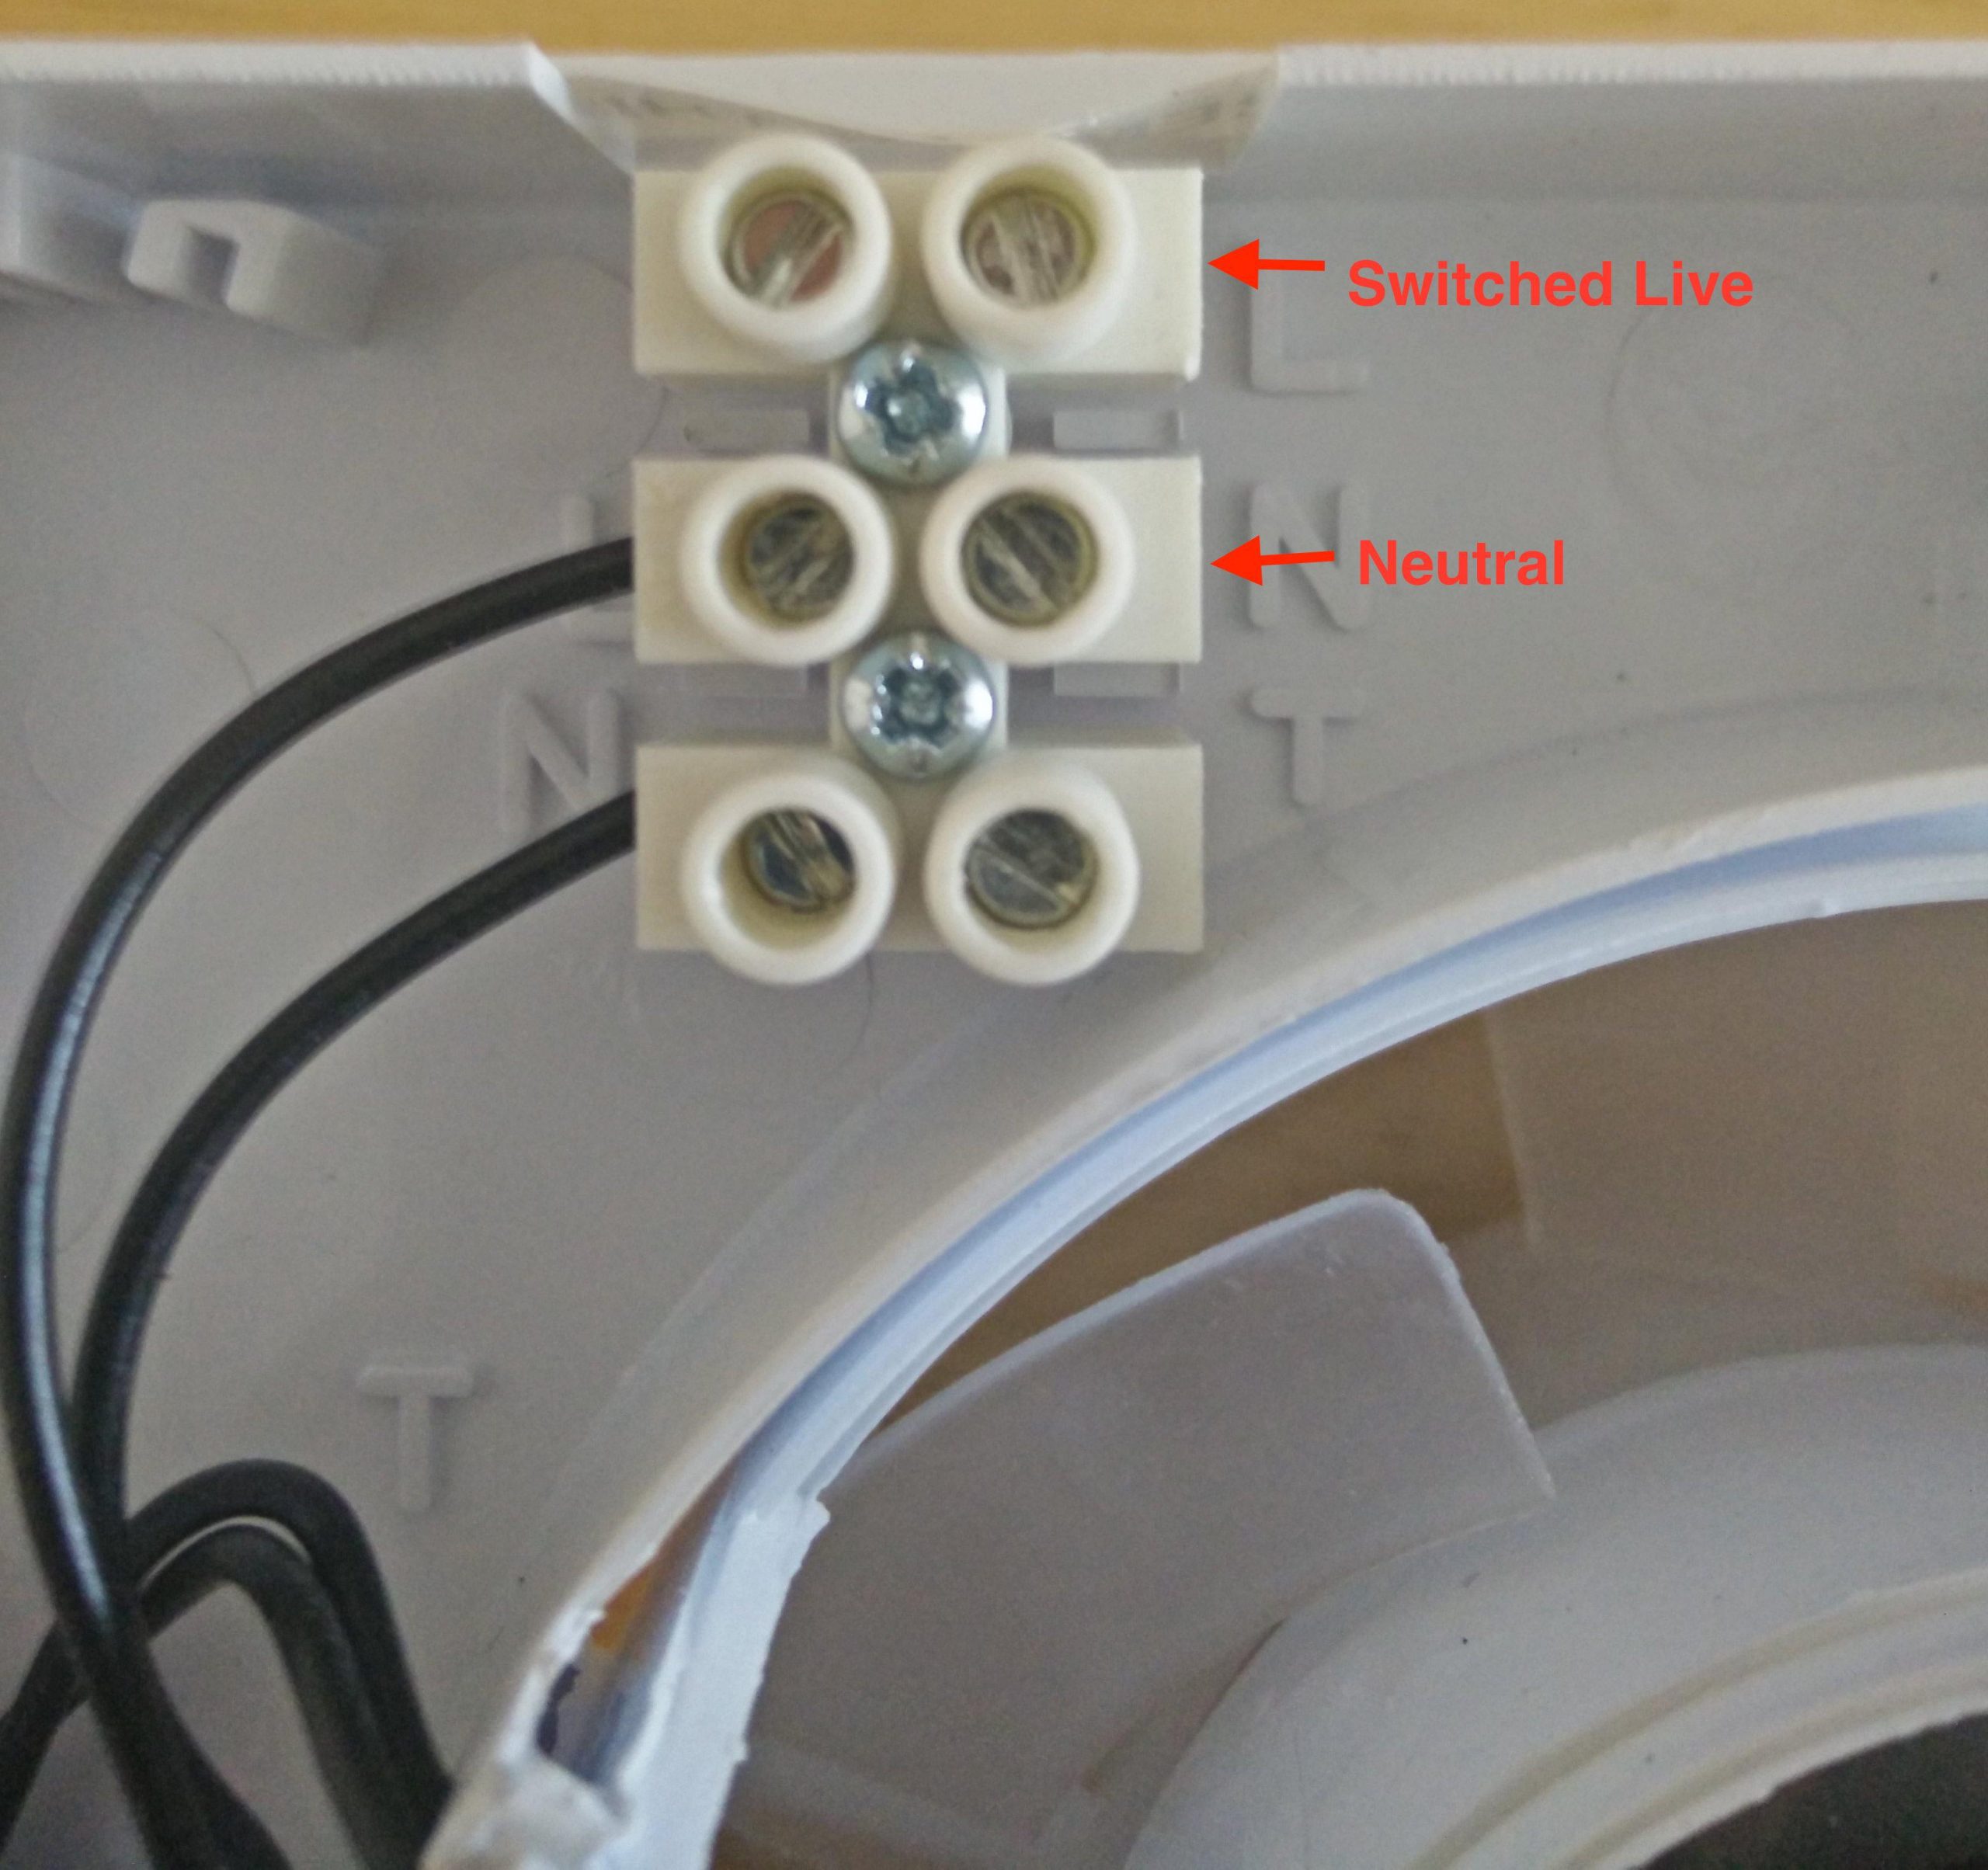 Changing Bathroom Extractor Fan From Timed To Standard intended for dimensions 3120 X 2935